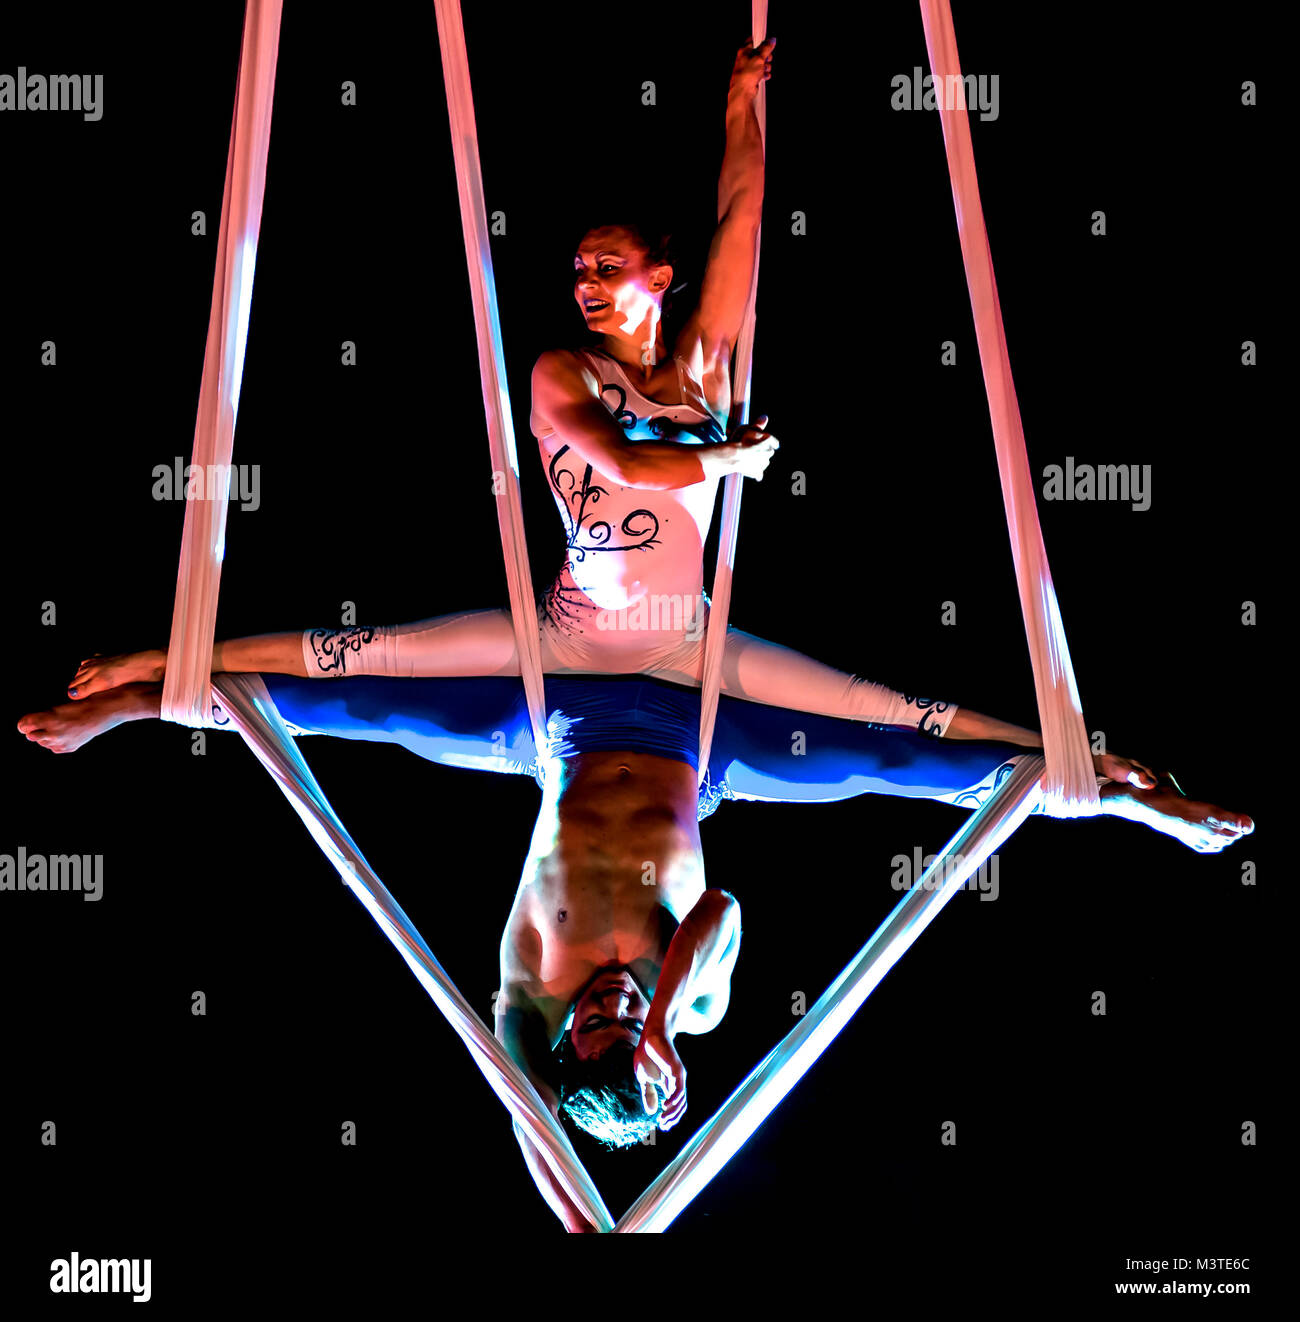 Bitonto, Italy - May 28, 2017: Acrobats perform a trick on slings suspended in the void and secured with harnesses on a festive evening in the main sq Stock Photo